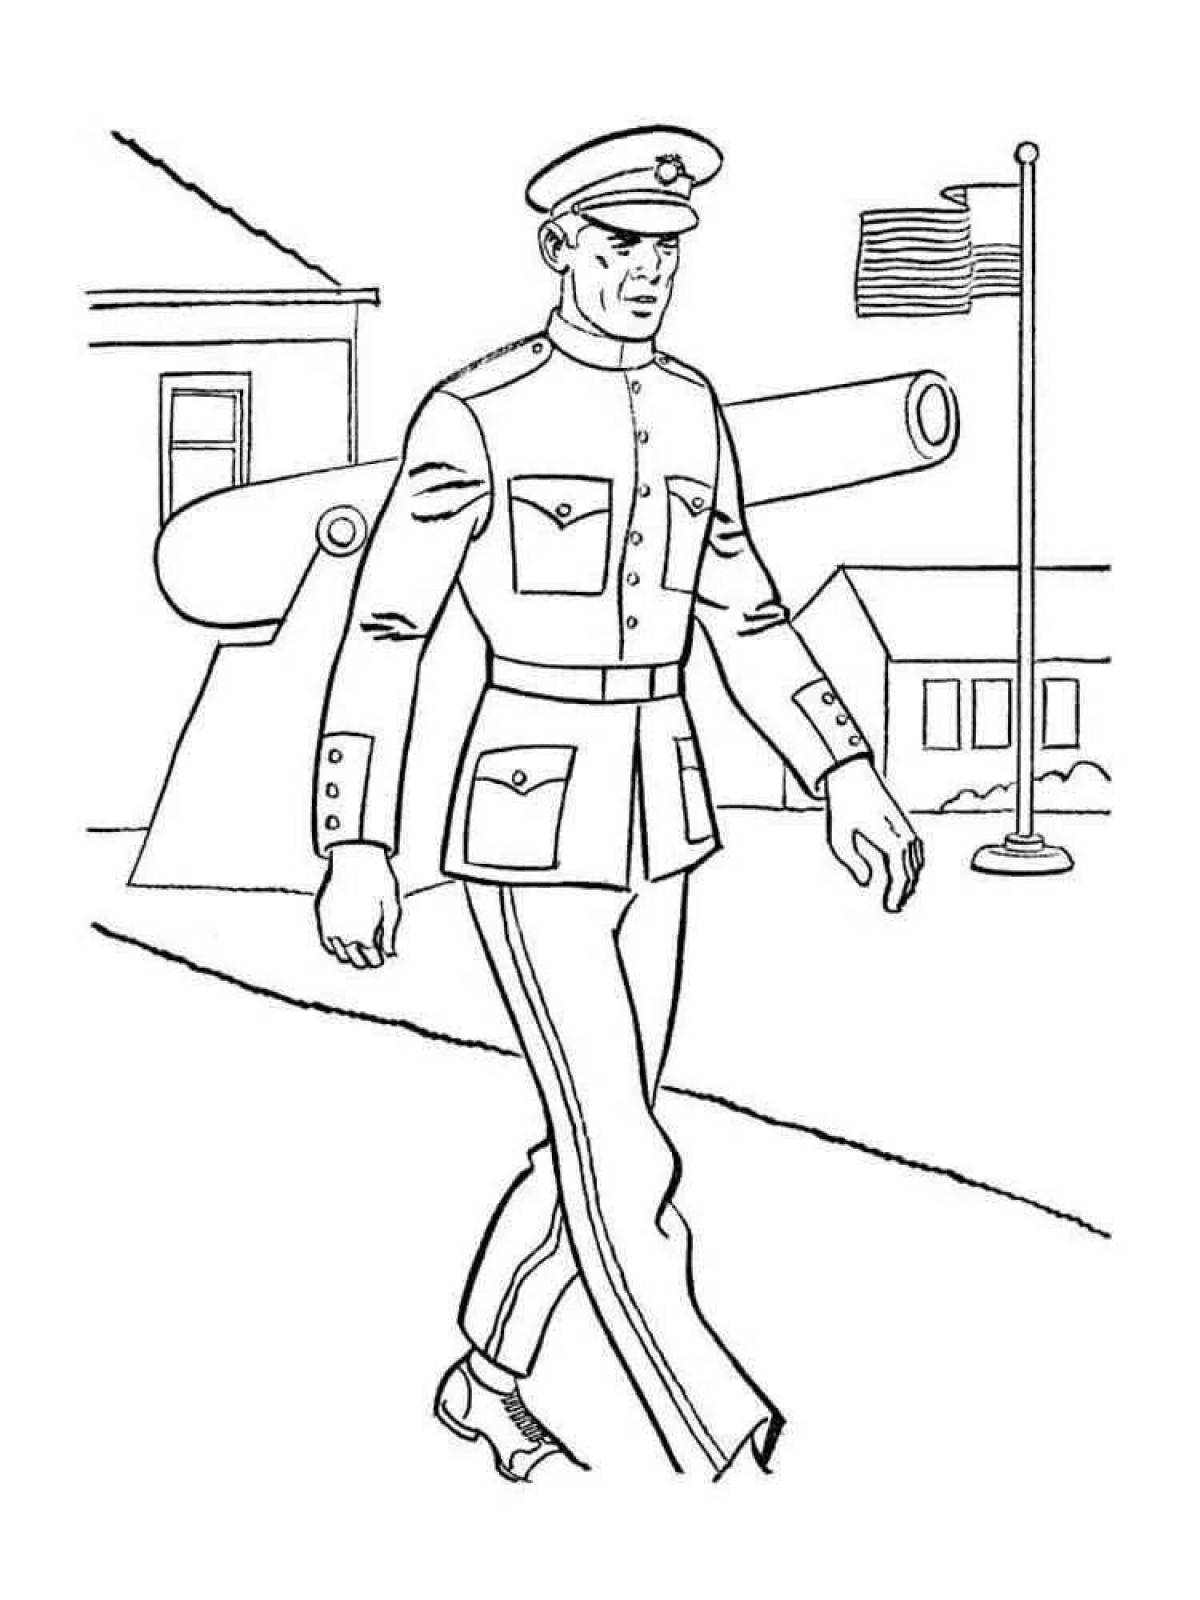 Shiny soldier figurine coloring page